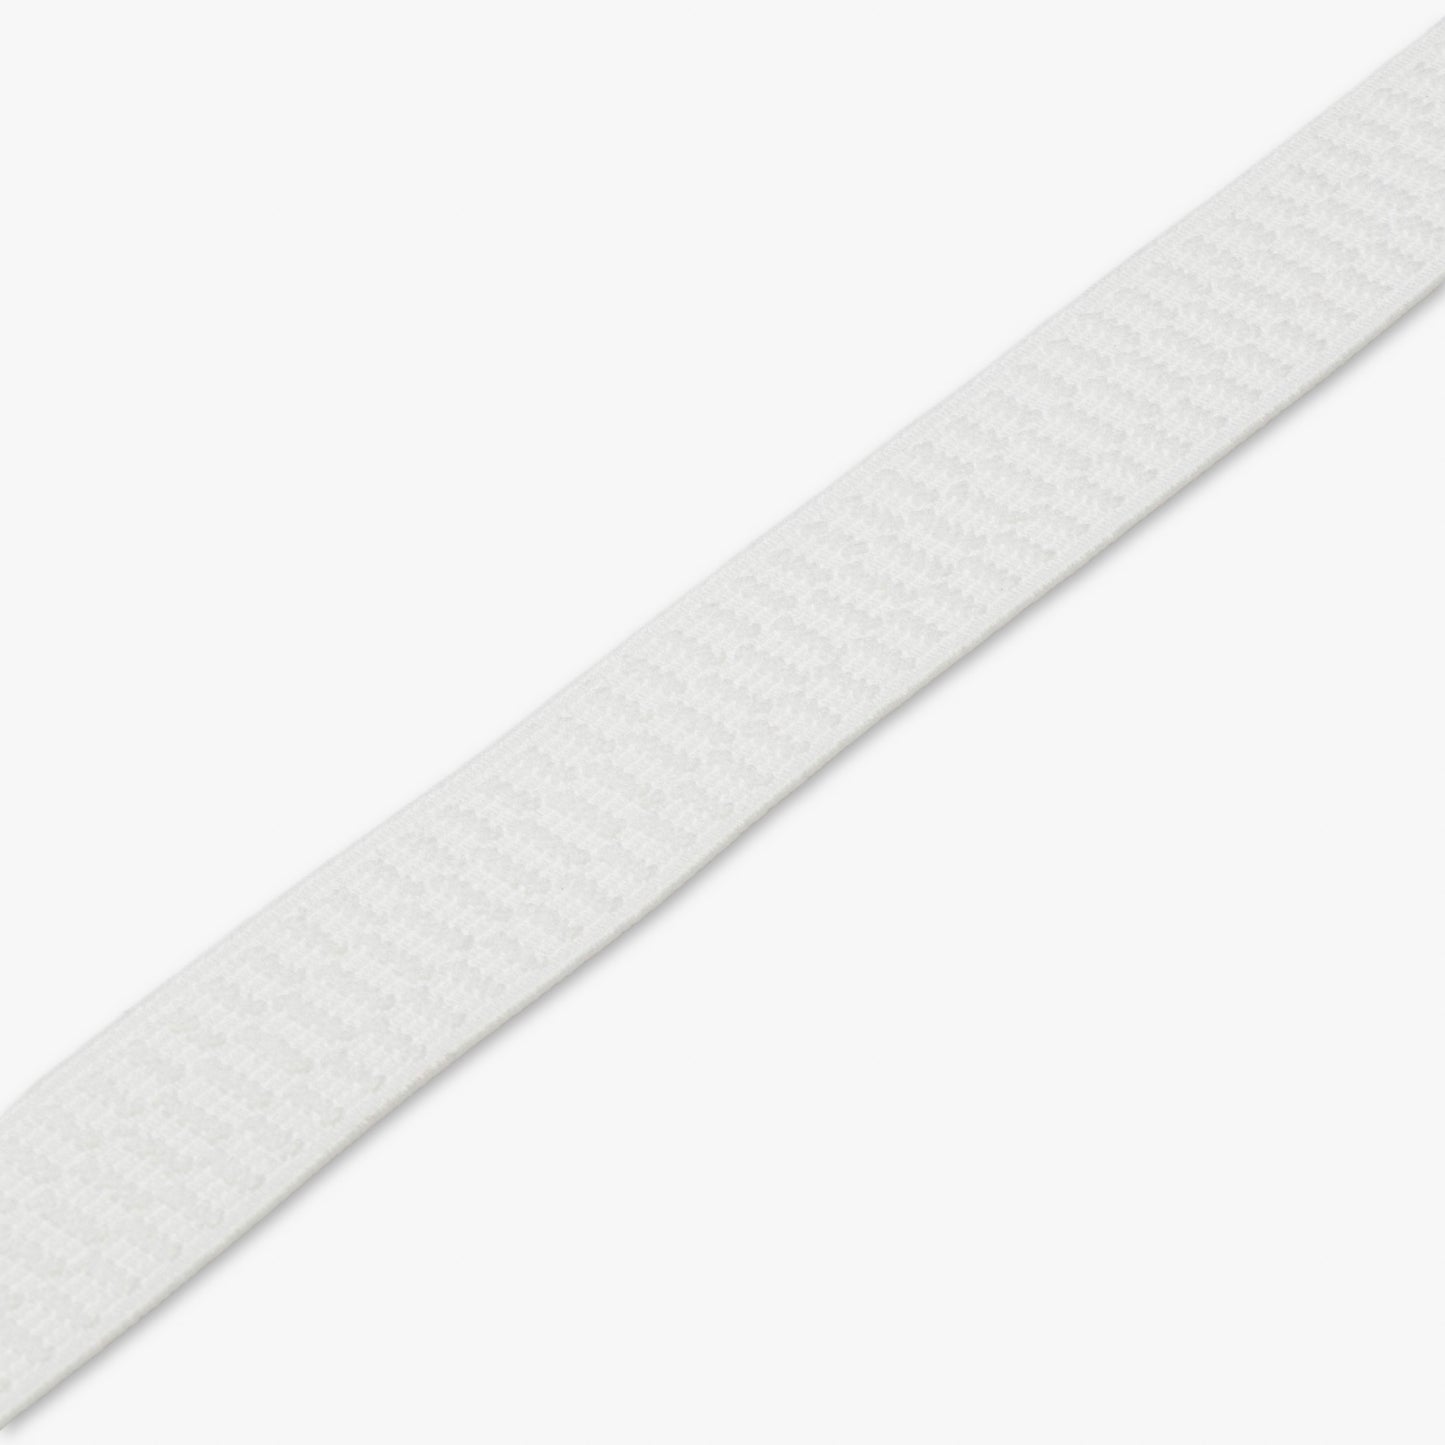 Elastic Non Curl 25mm White (Prevents curling at the edges )